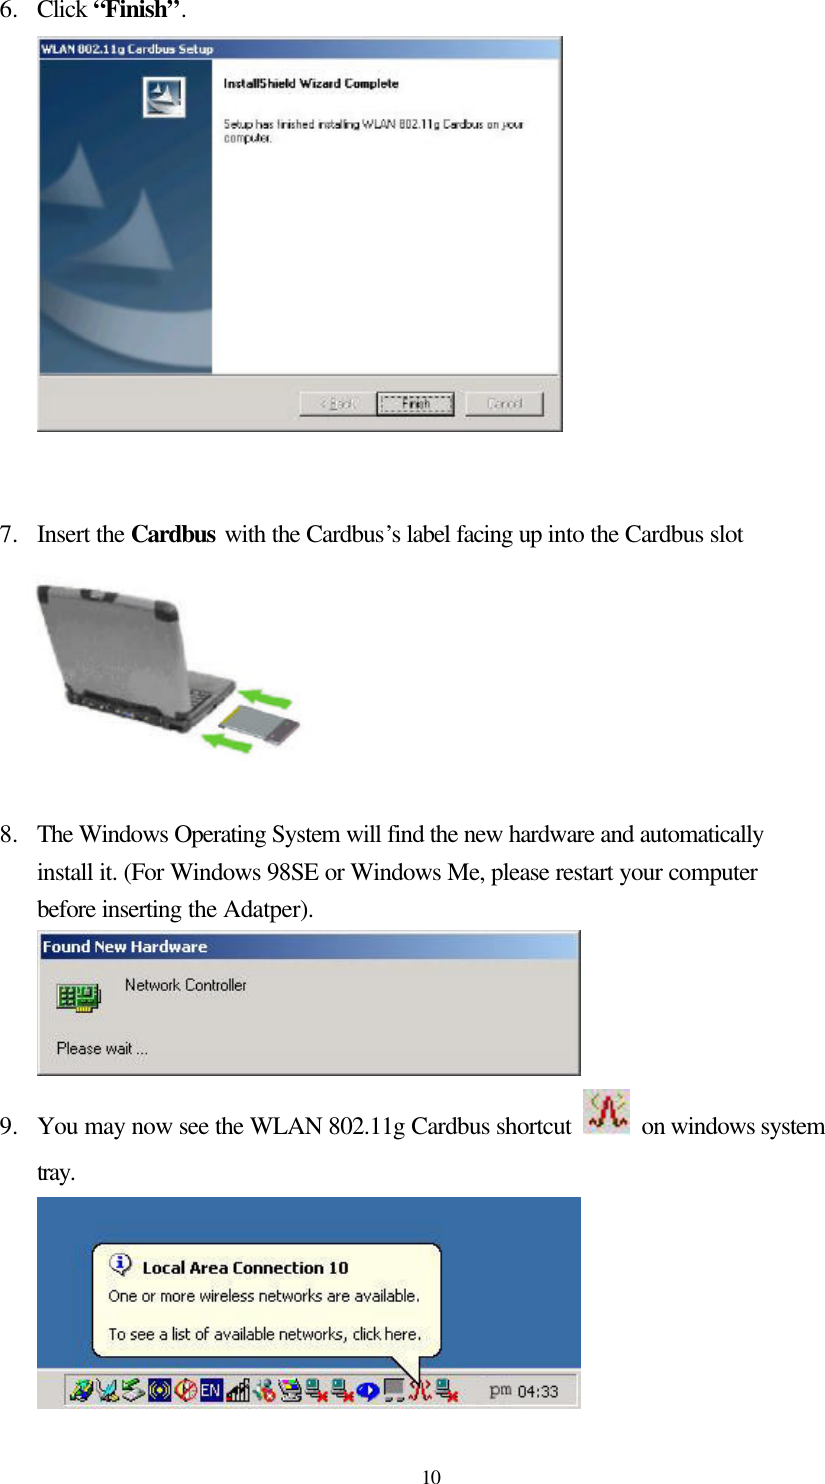  10 6.  Click “Finish”.    7.  Insert the Cardbus with the Cardbus’s label facing up into the Cardbus slot   8.  The Windows Operating System will find the new hardware and automatically install it. (For Windows 98SE or Windows Me, please restart your computer before inserting the Adatper).  9.  You may now see the WLAN 802.11g Cardbus shortcut   on windows system tray.        